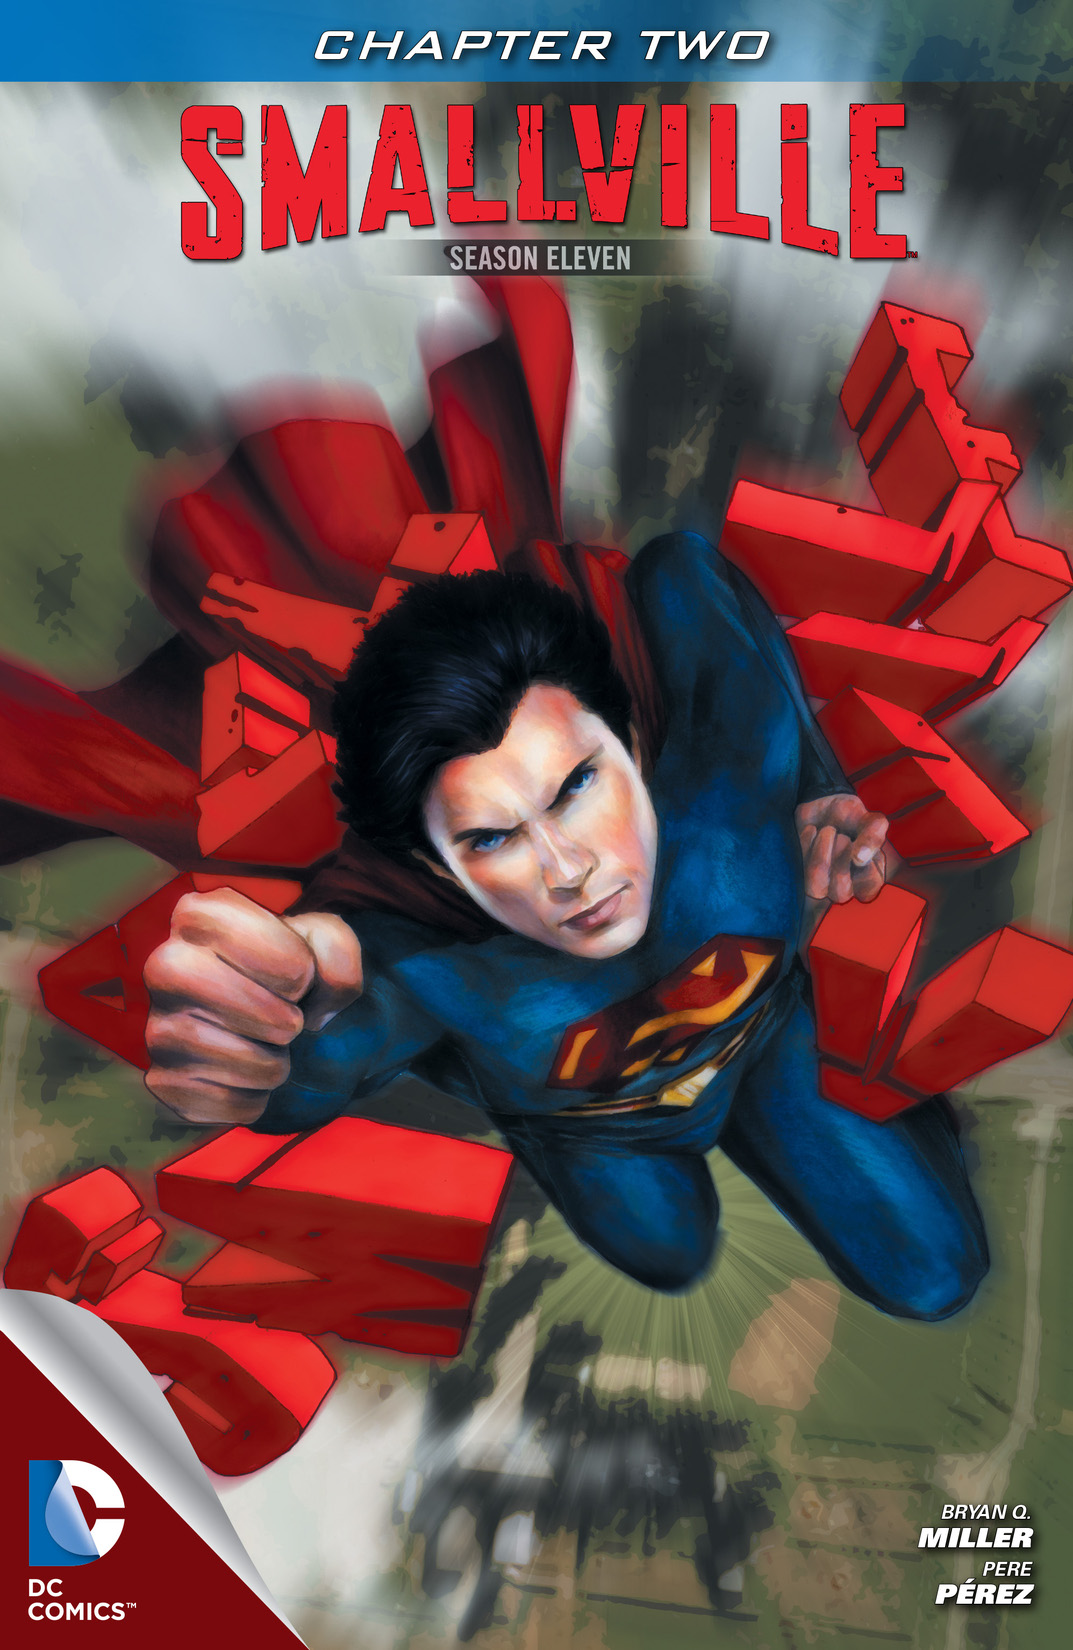 Smallville Season 11 #2 preview images